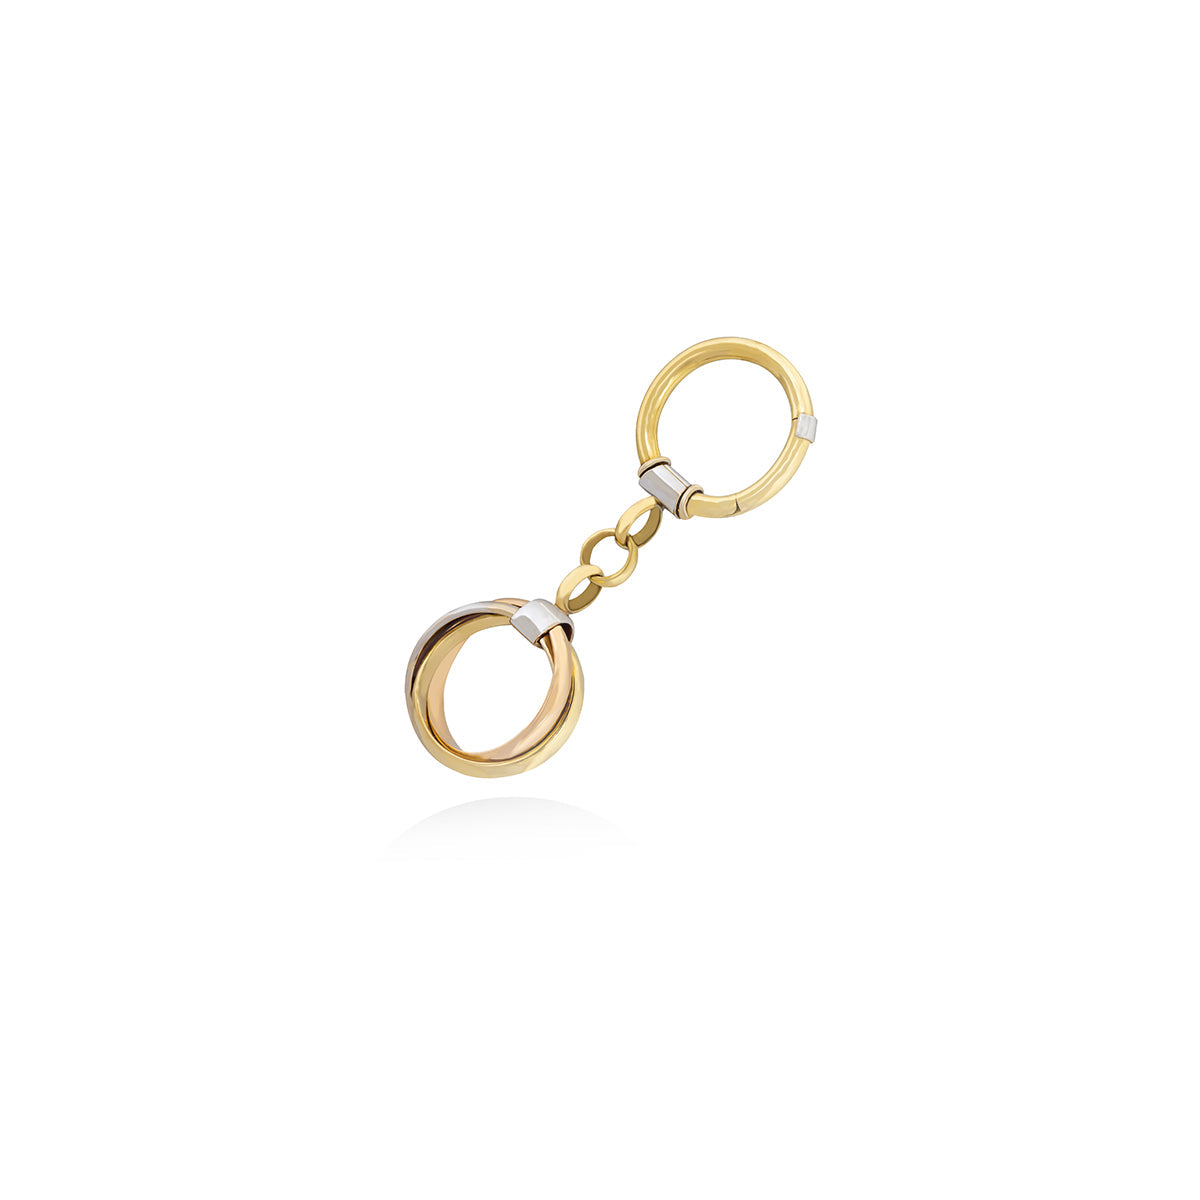 Trio Rings Keychain in 18k Gold